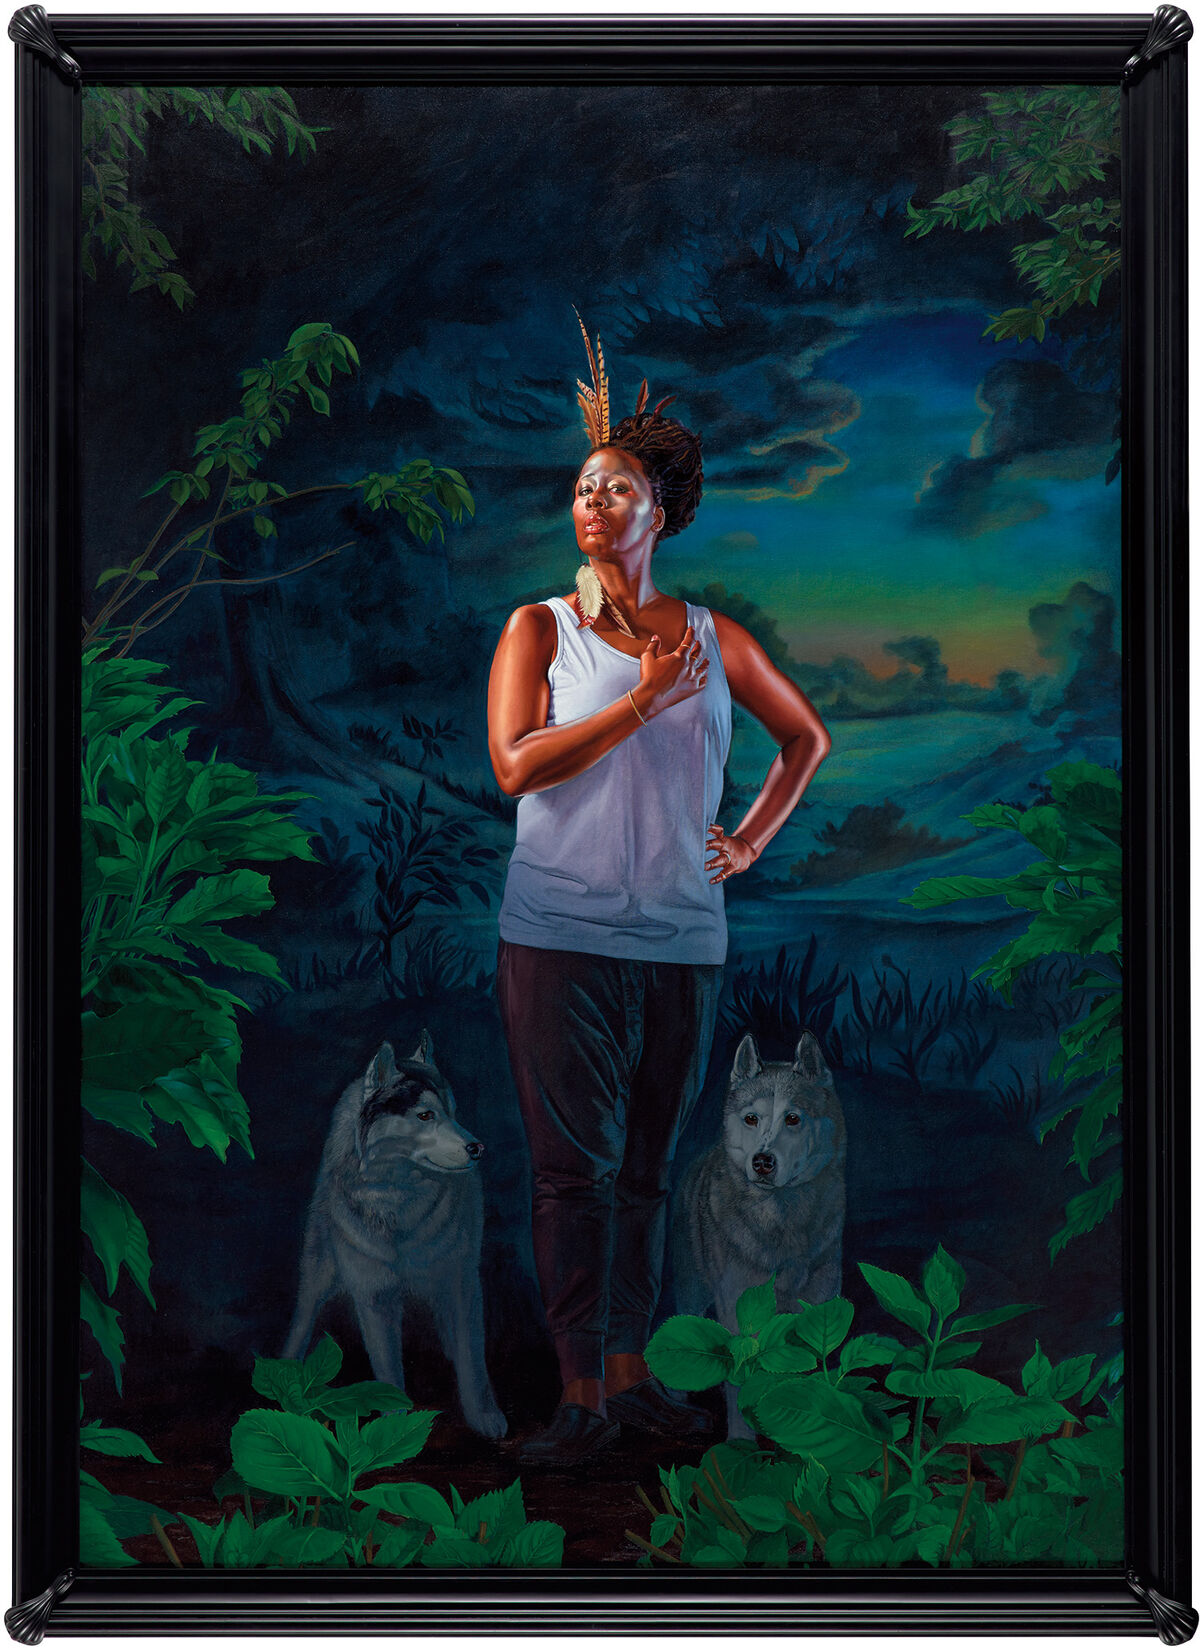 Kehinde Wiley, Portrait of Mickalene Thomas, the Coyote, 2017.  © Kehinde Wiley. Courtesy of the artist and Phillips.